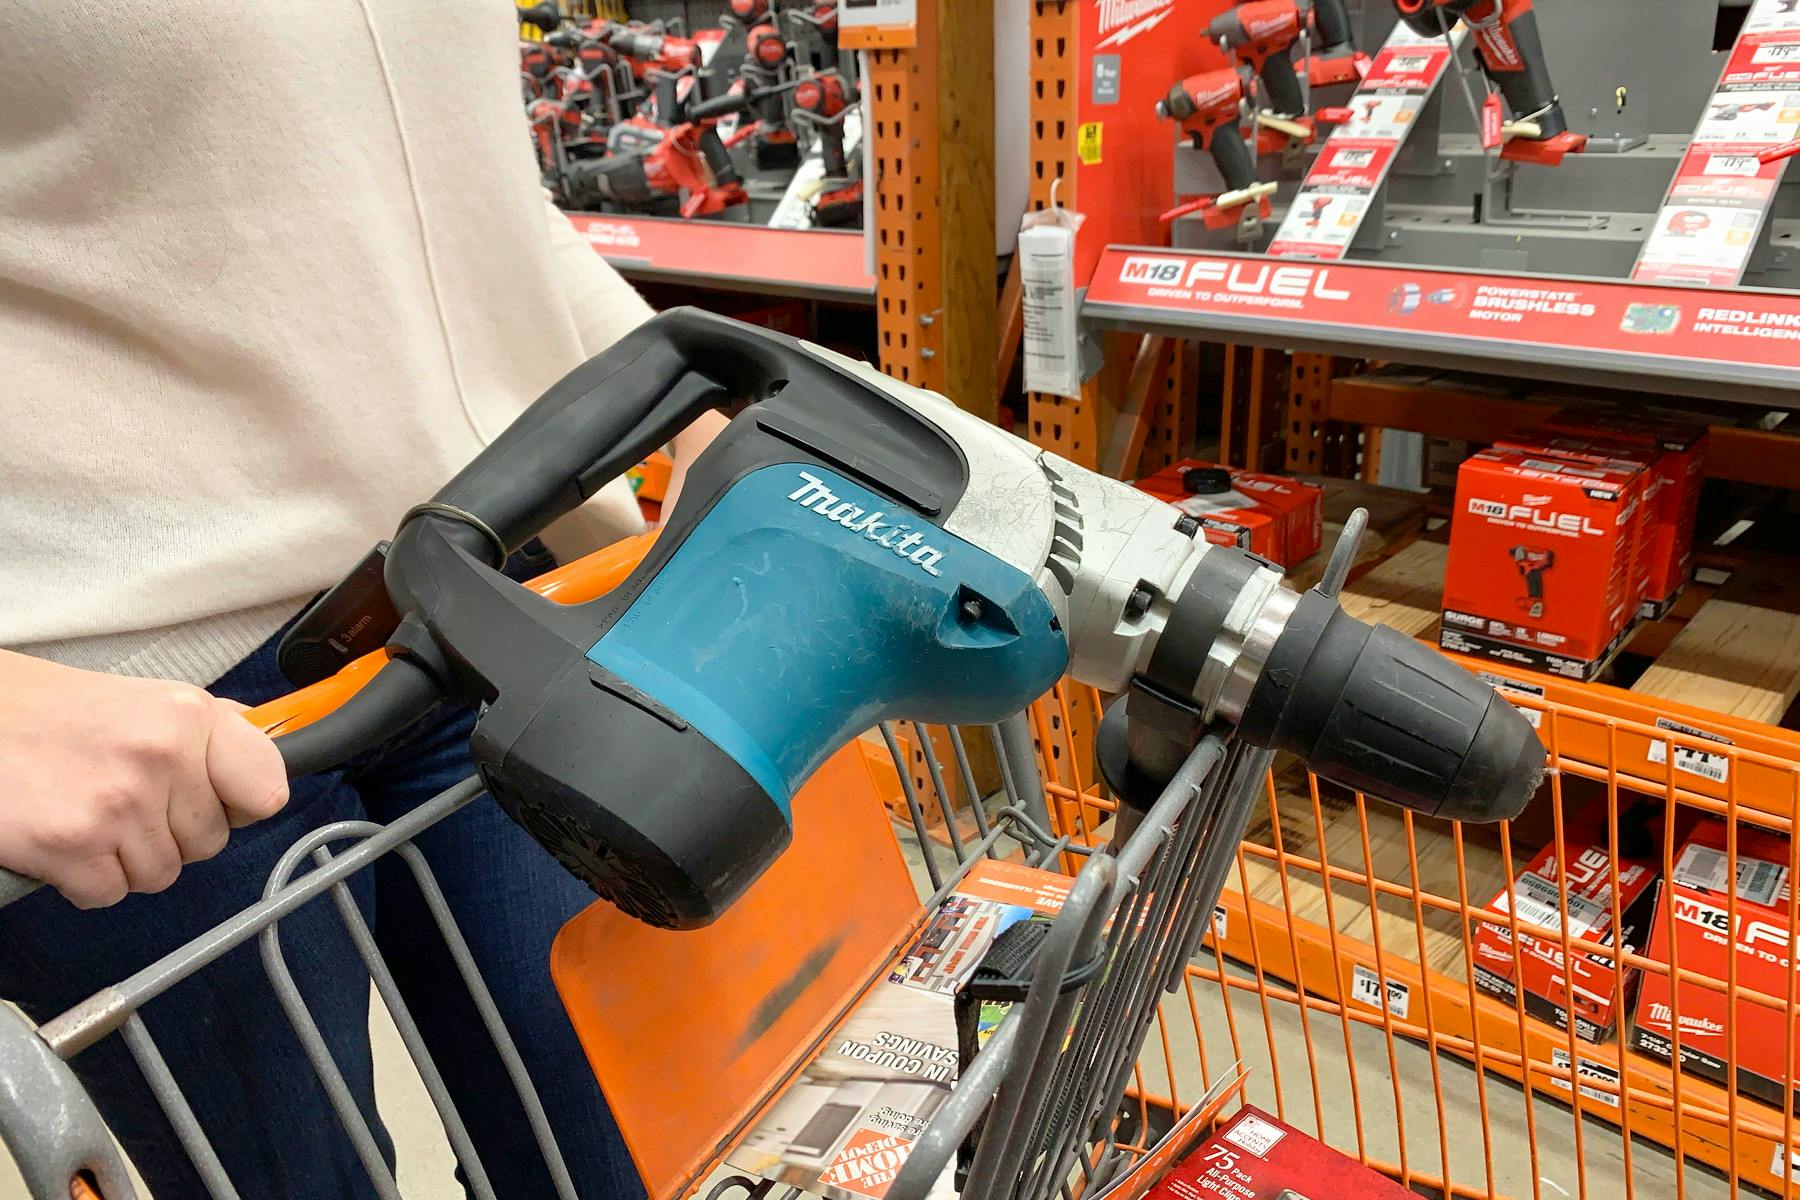 An old tool in a shopping cart.